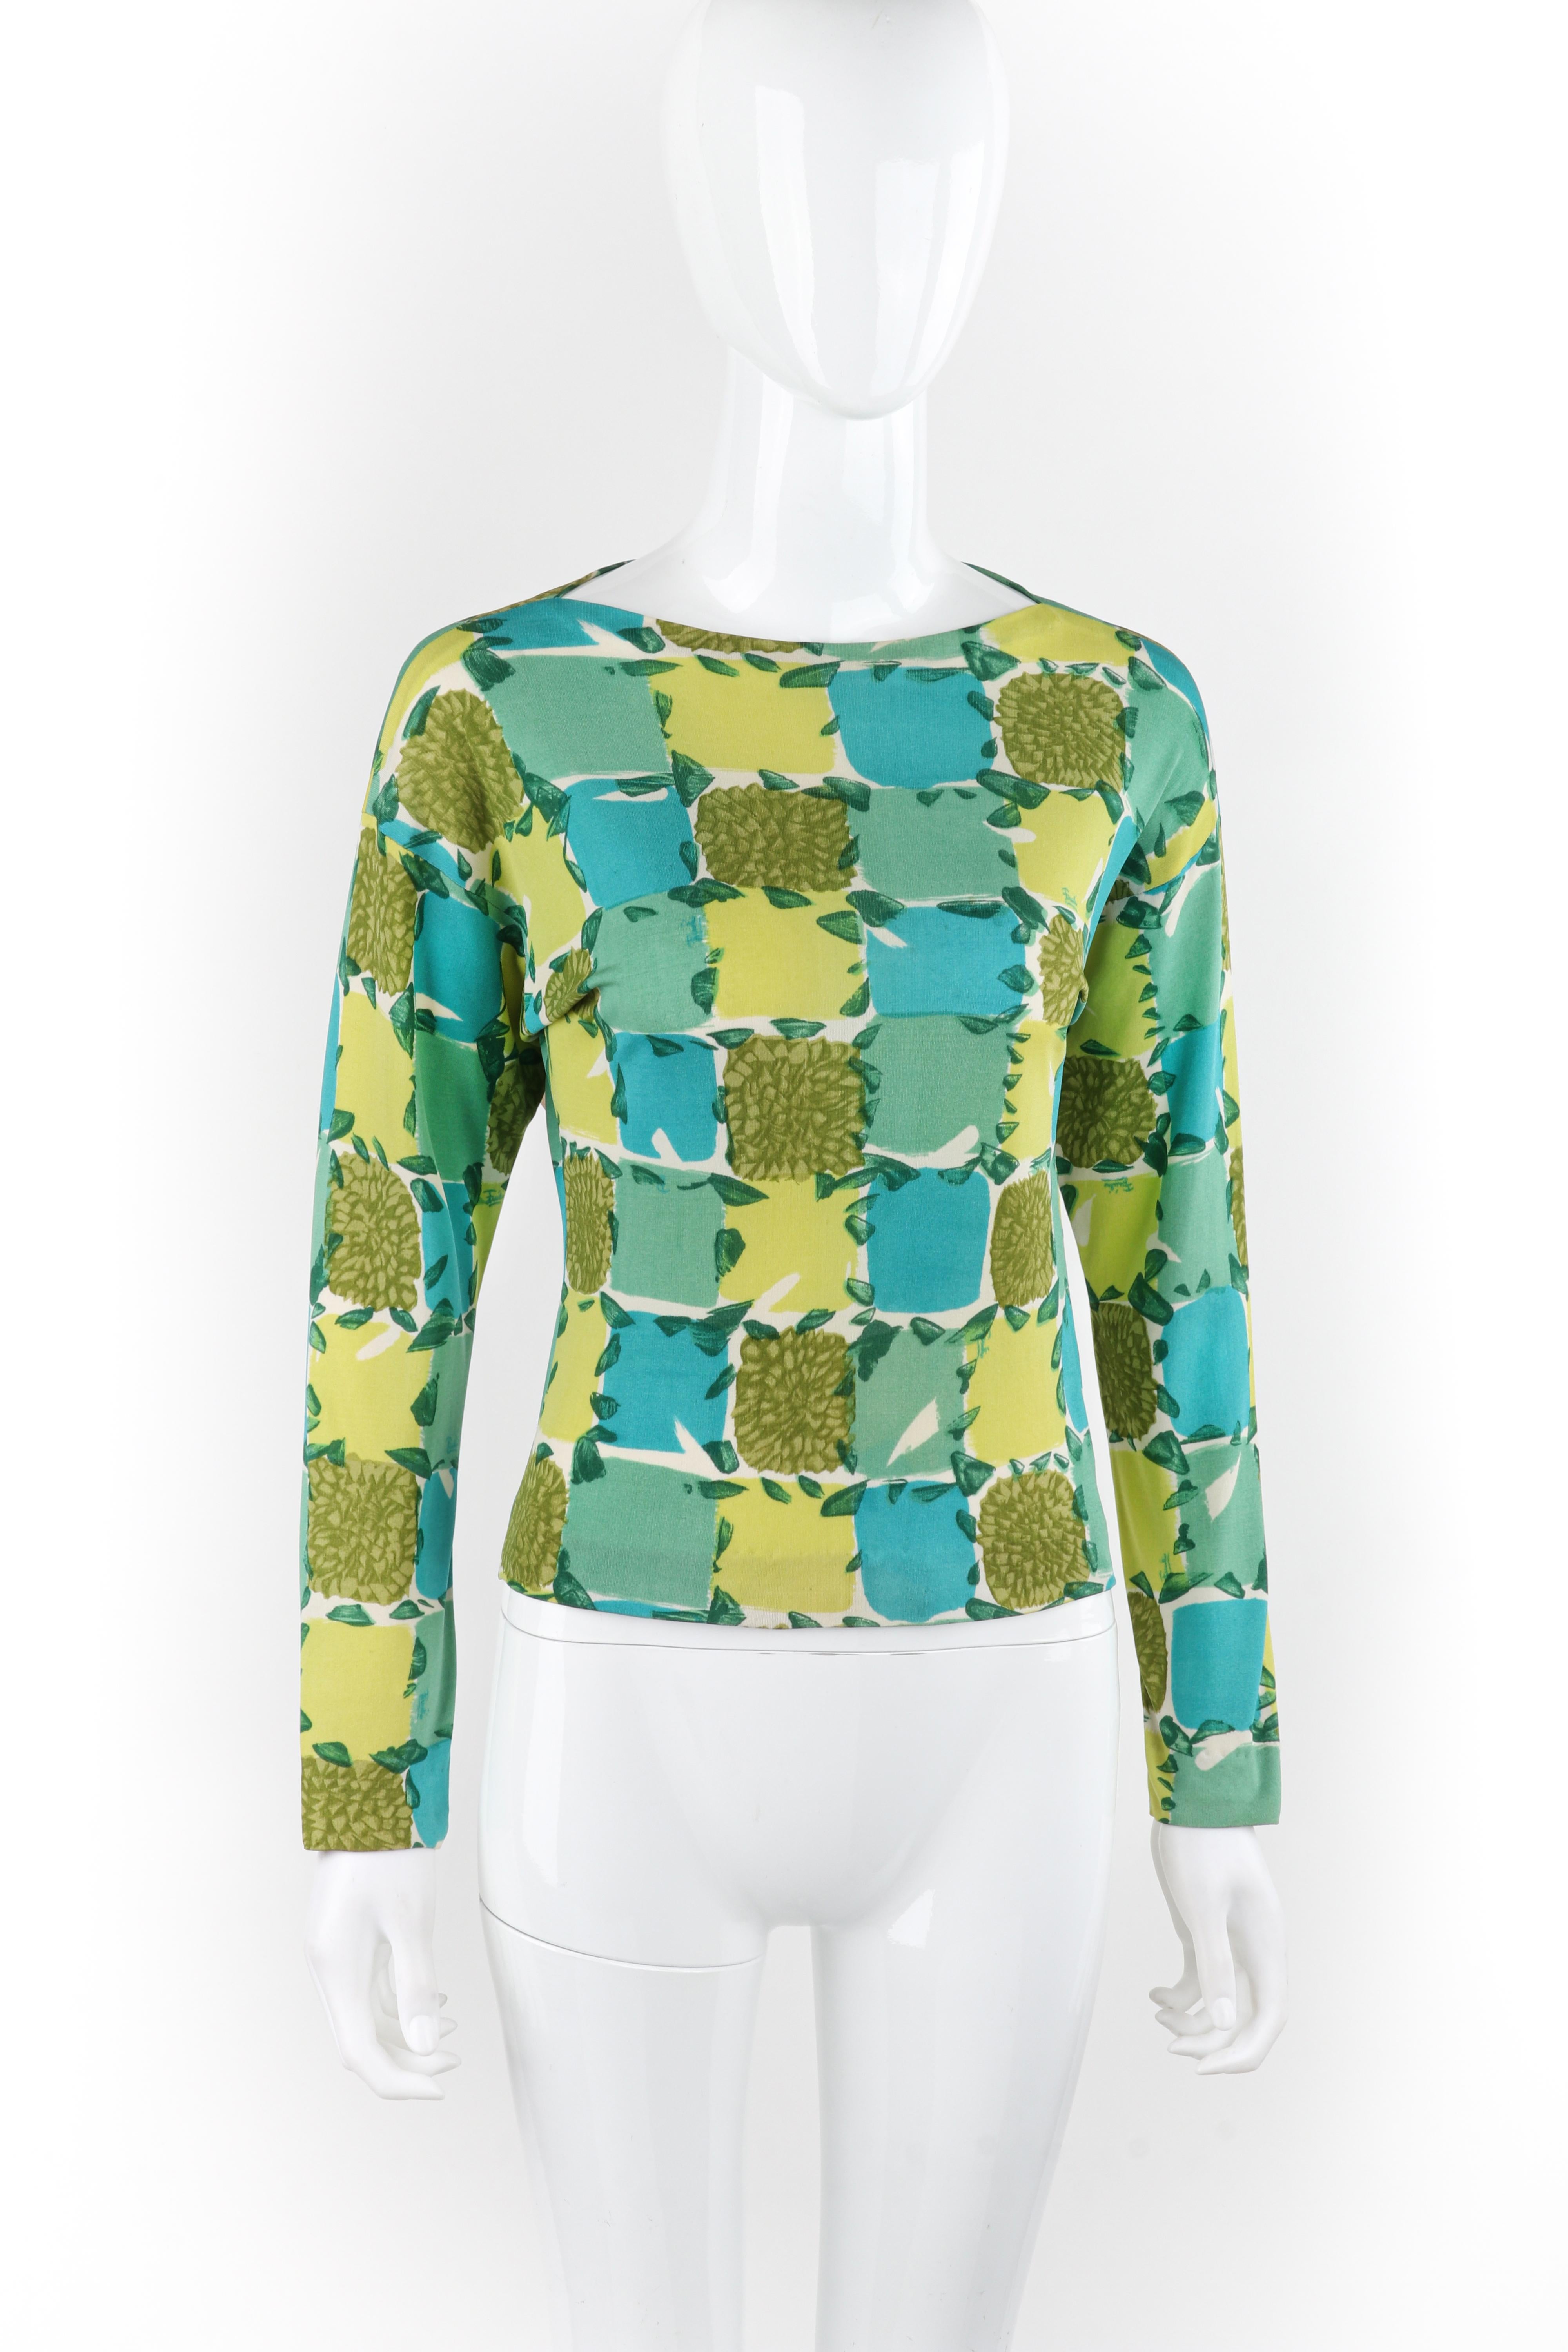 Women's EMILIO PUCCI c.1956 Blue Yellow Green Abstract Floral Check Print Silk Sweater For Sale